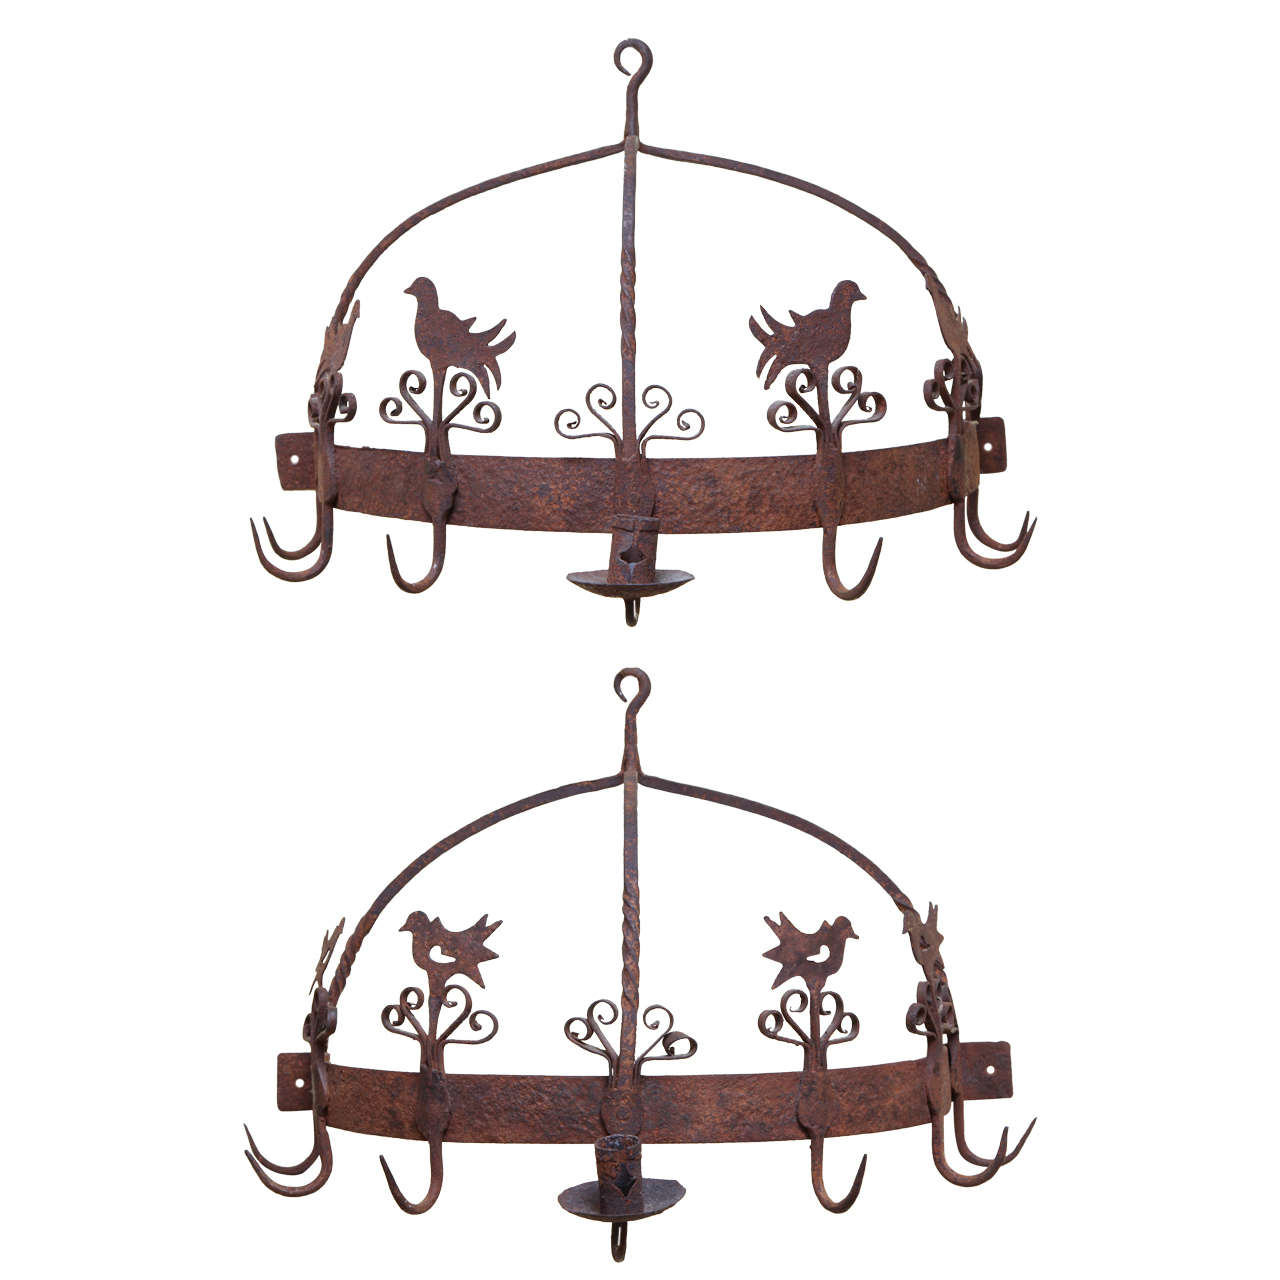 Pair of Wrought Iron Flush-Mounted Game Racks, American, 18th Century For Sale